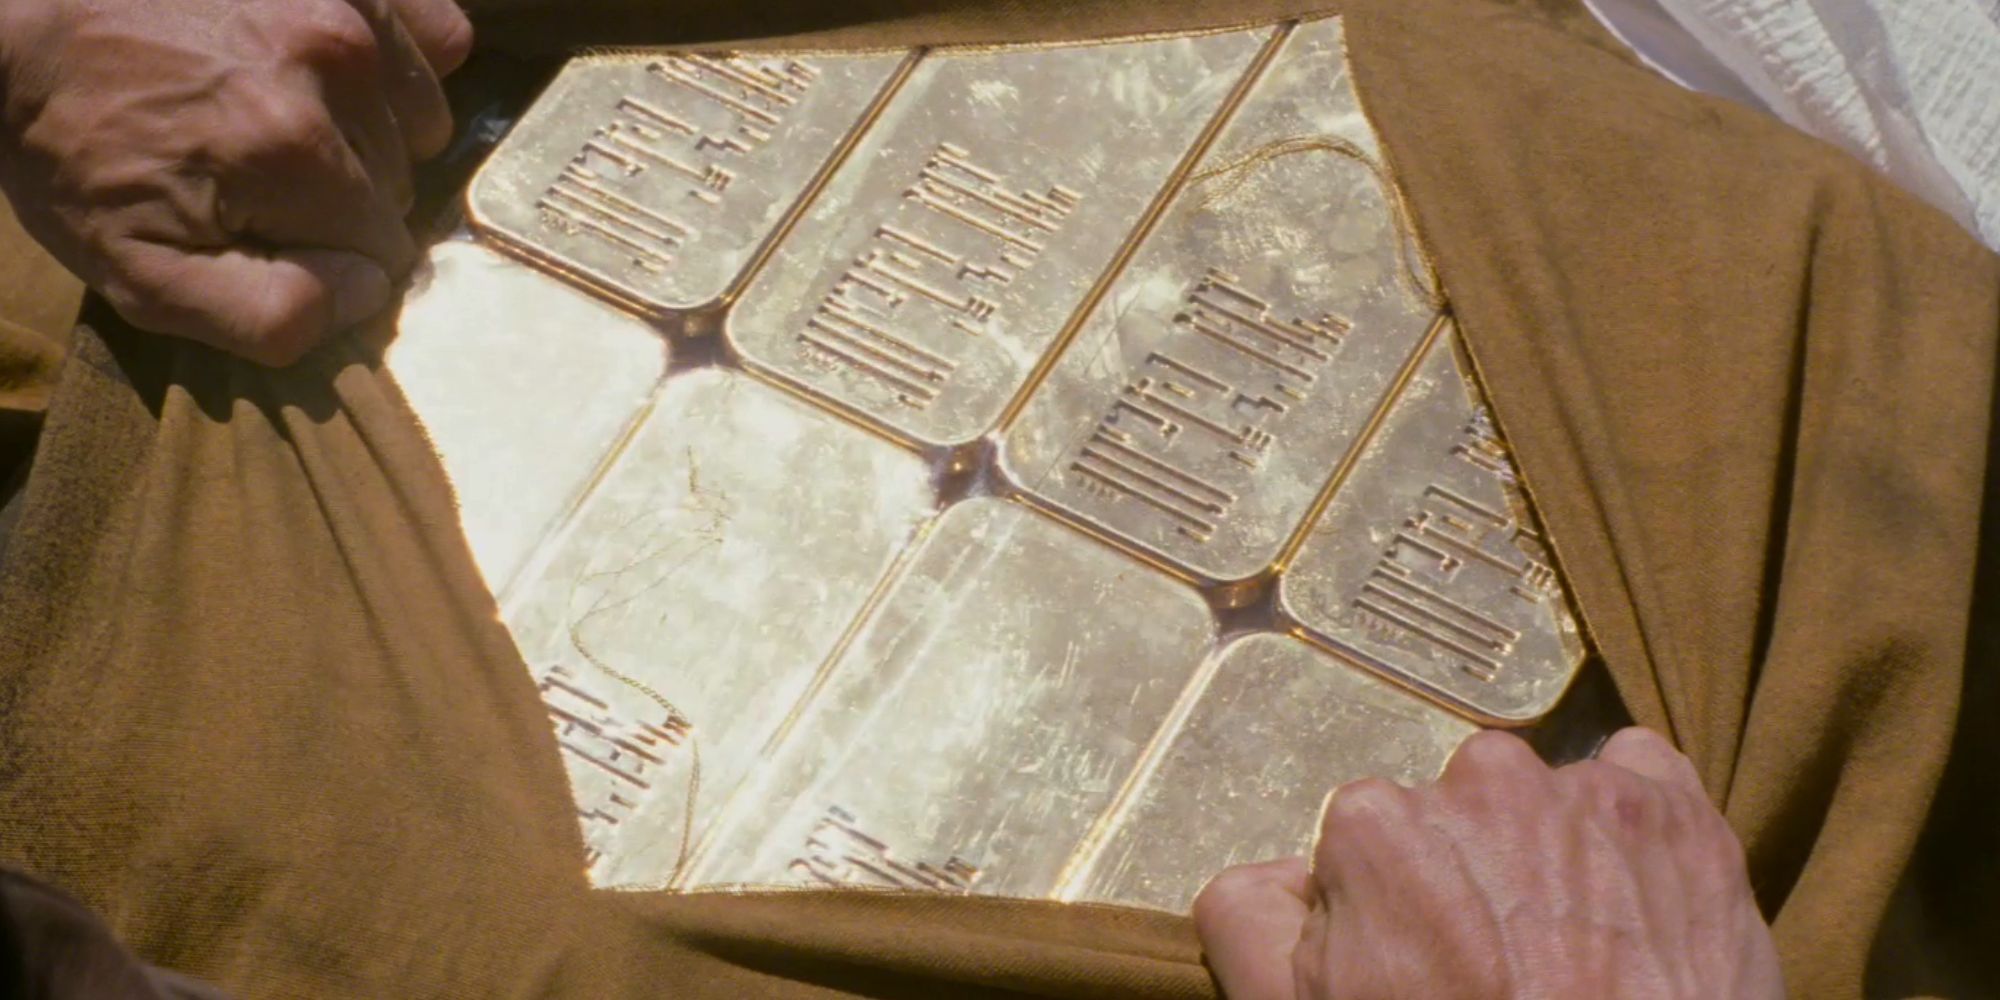 Clothes being parted to reveal a lot of gold bars in Looper